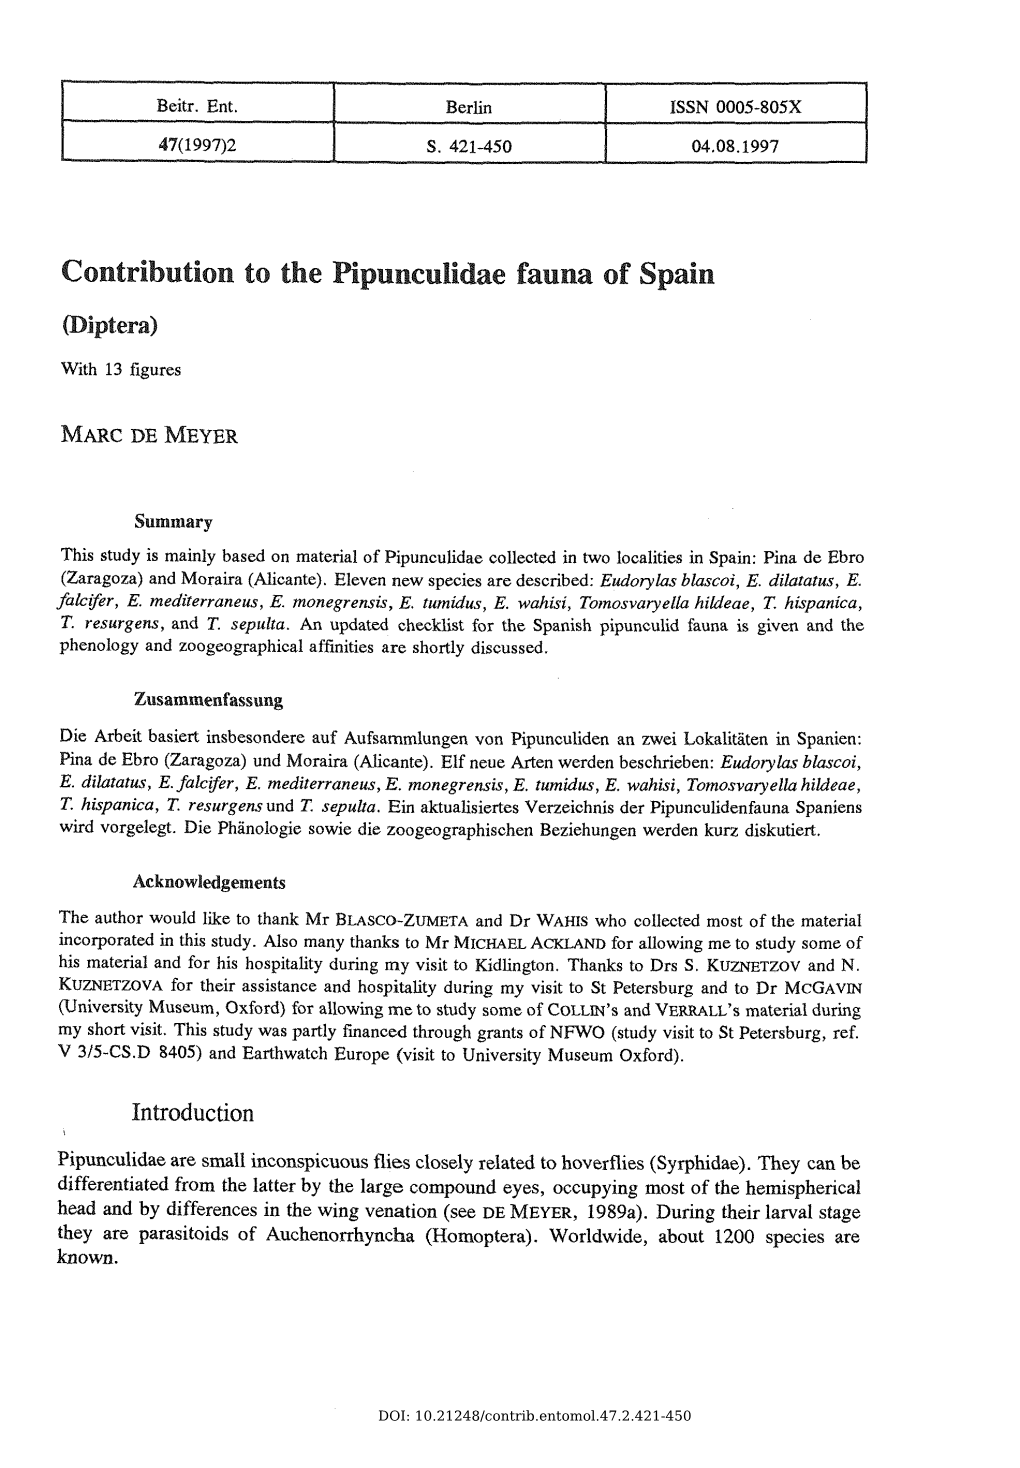 Contribution to the Pipunculidae Fauna of Spain (Diptera)